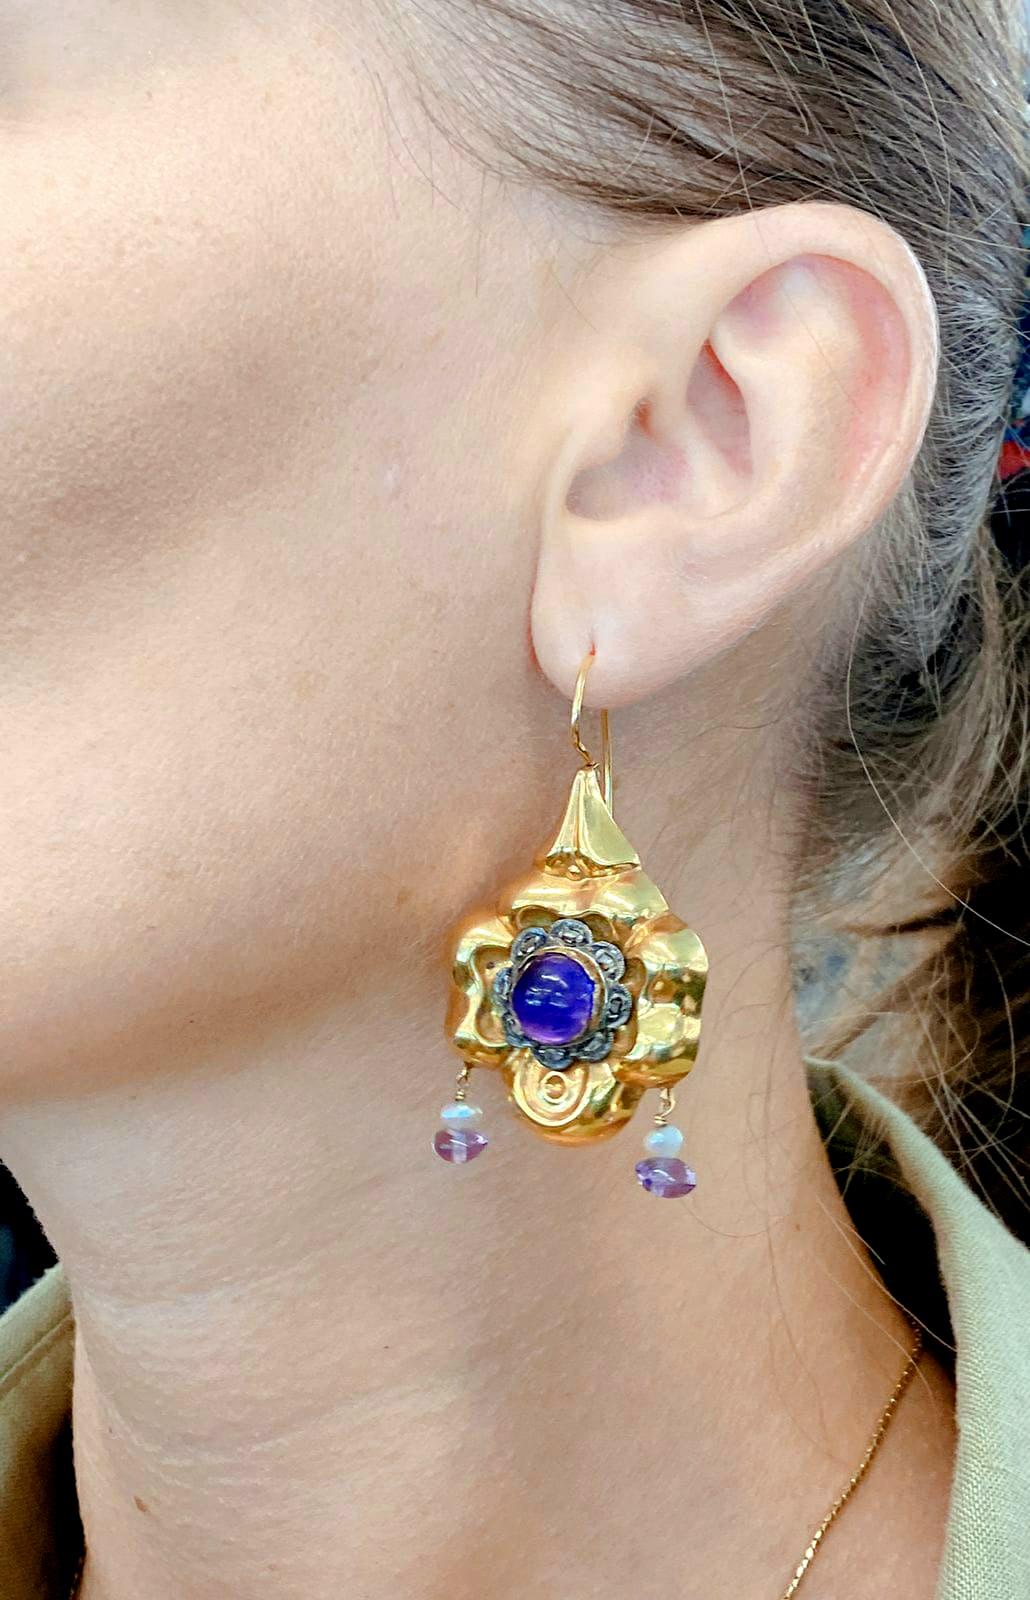 Antique amethyst earrings large in size centered with 2 natural pink cabochon amethyst flanked with rose cut diamonds and dangling pearls  in 14k gold settings with total gold weight of 16 grams and 5cm earrings lengh hall marked on the back with